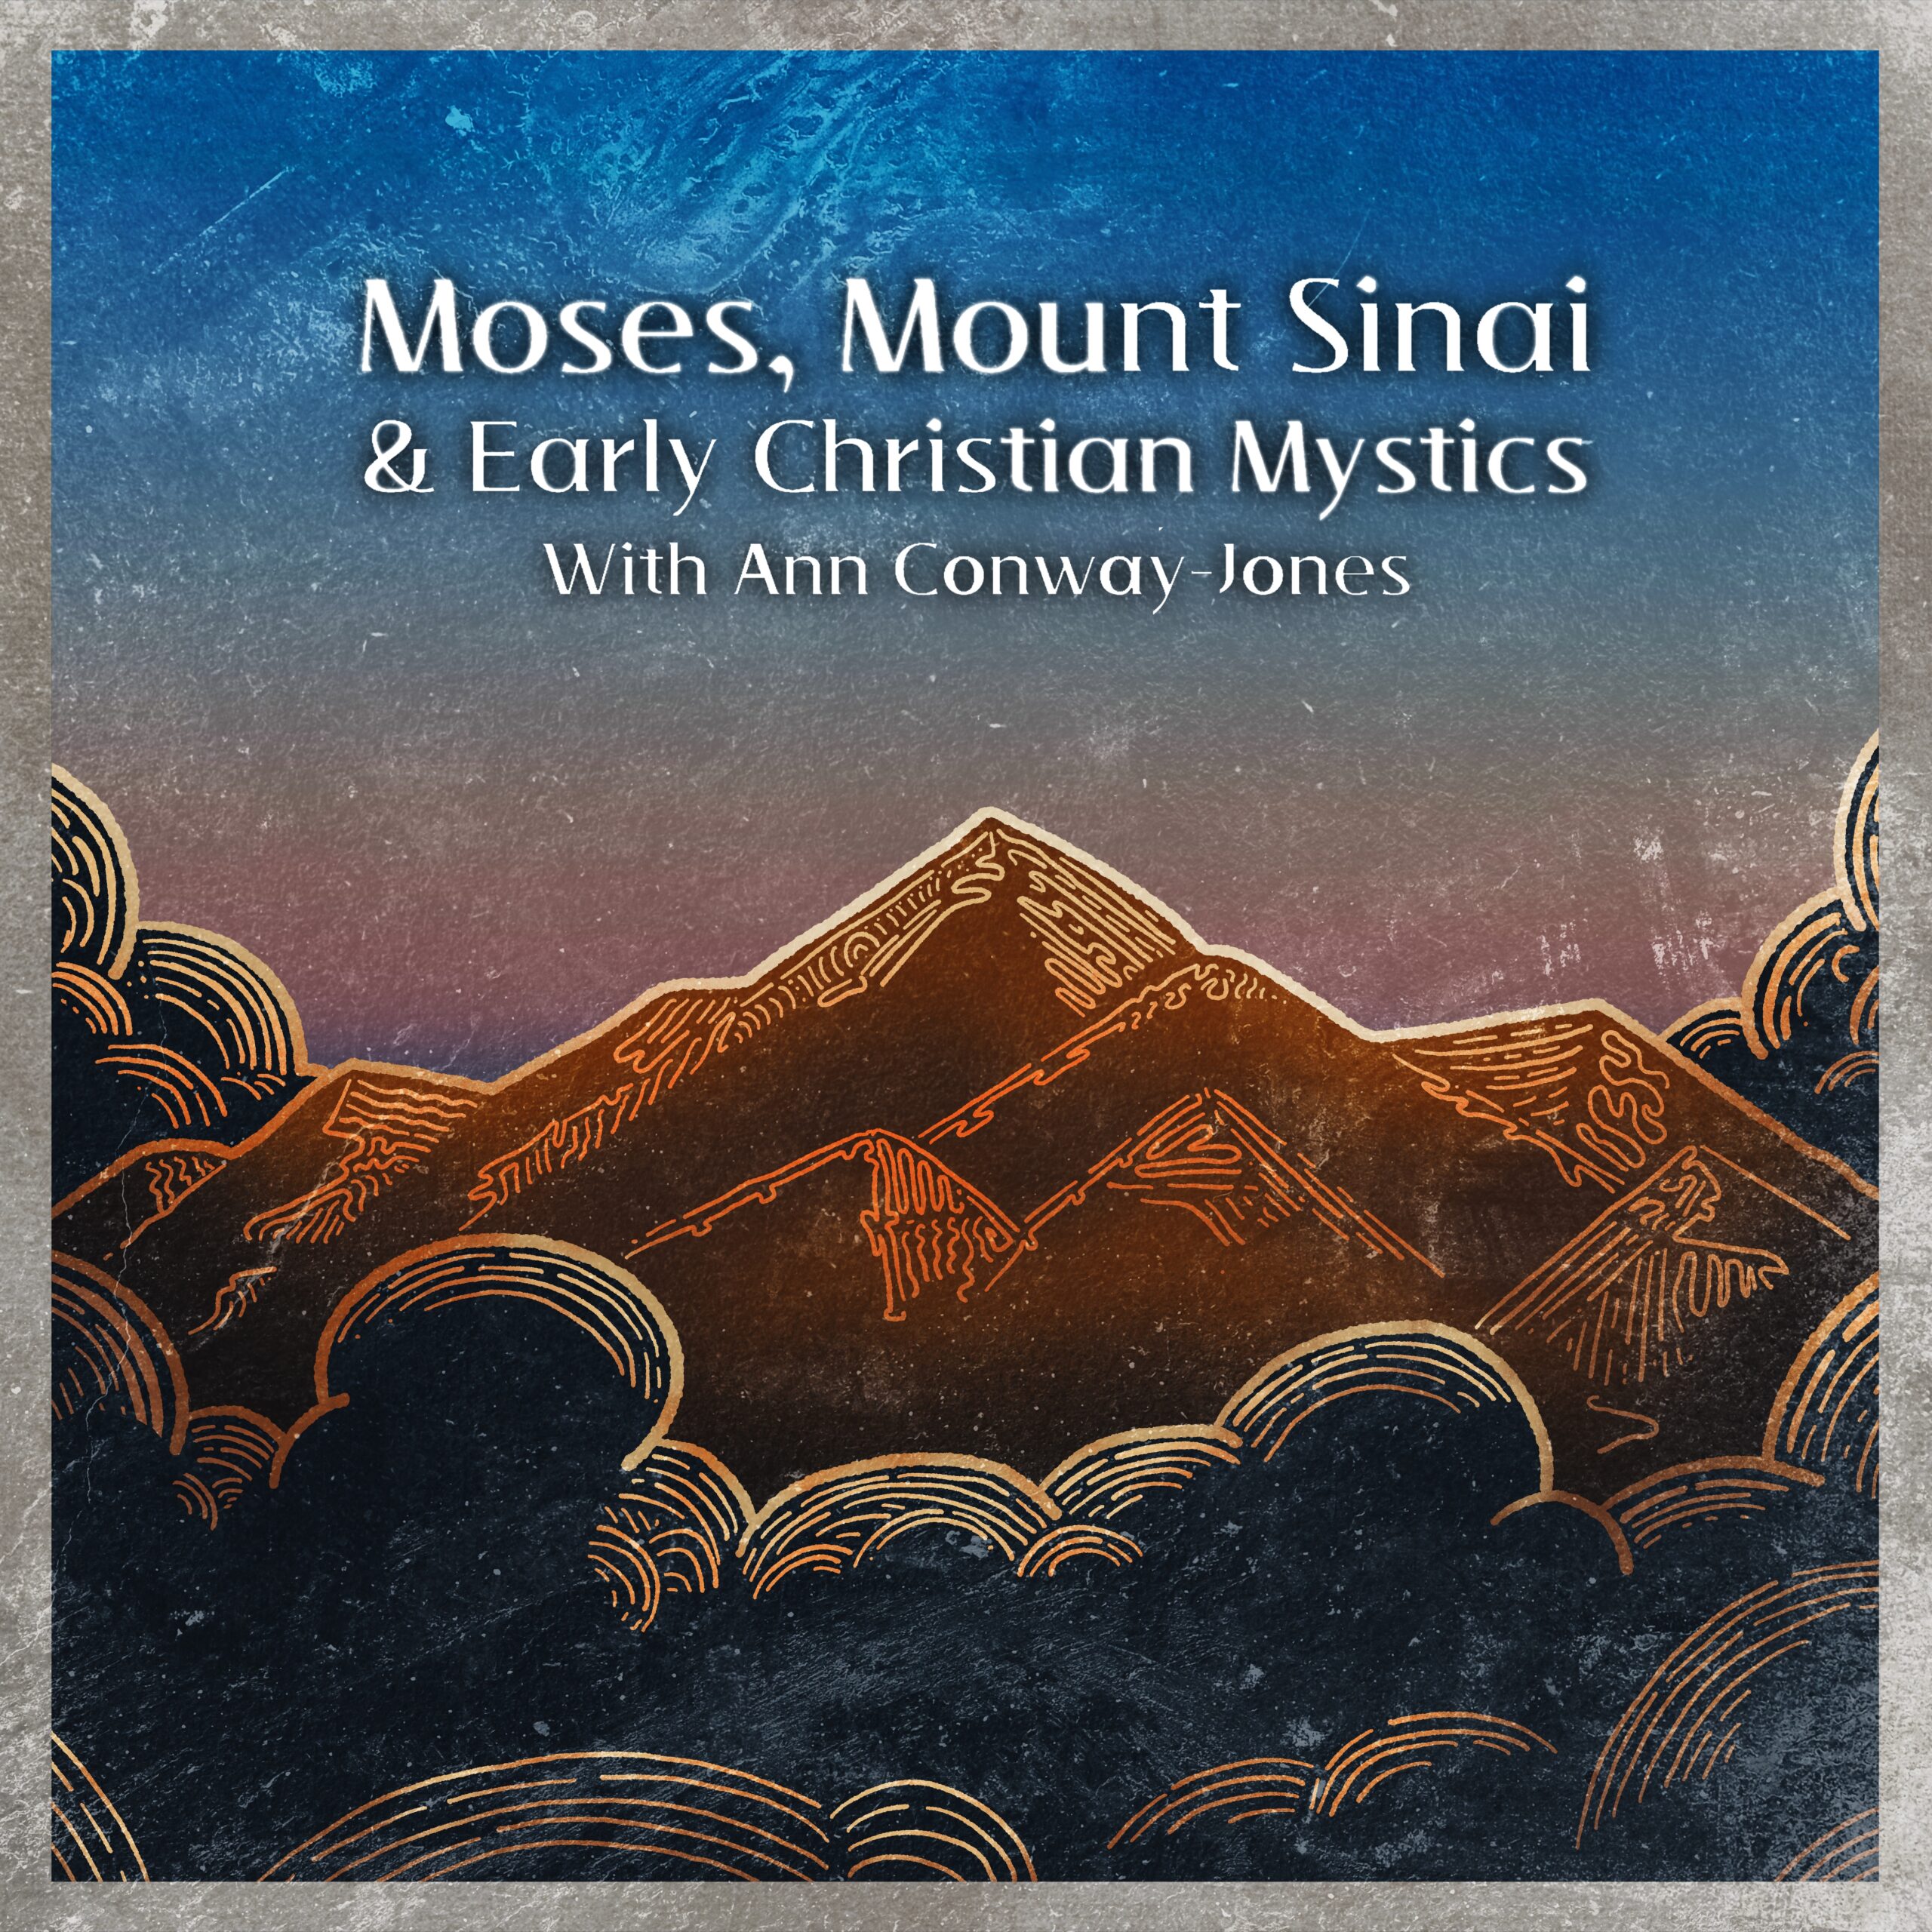 Moses, Mount Sinai, and early Christian Mystics with Ann Conway-Jones - Wise Studies